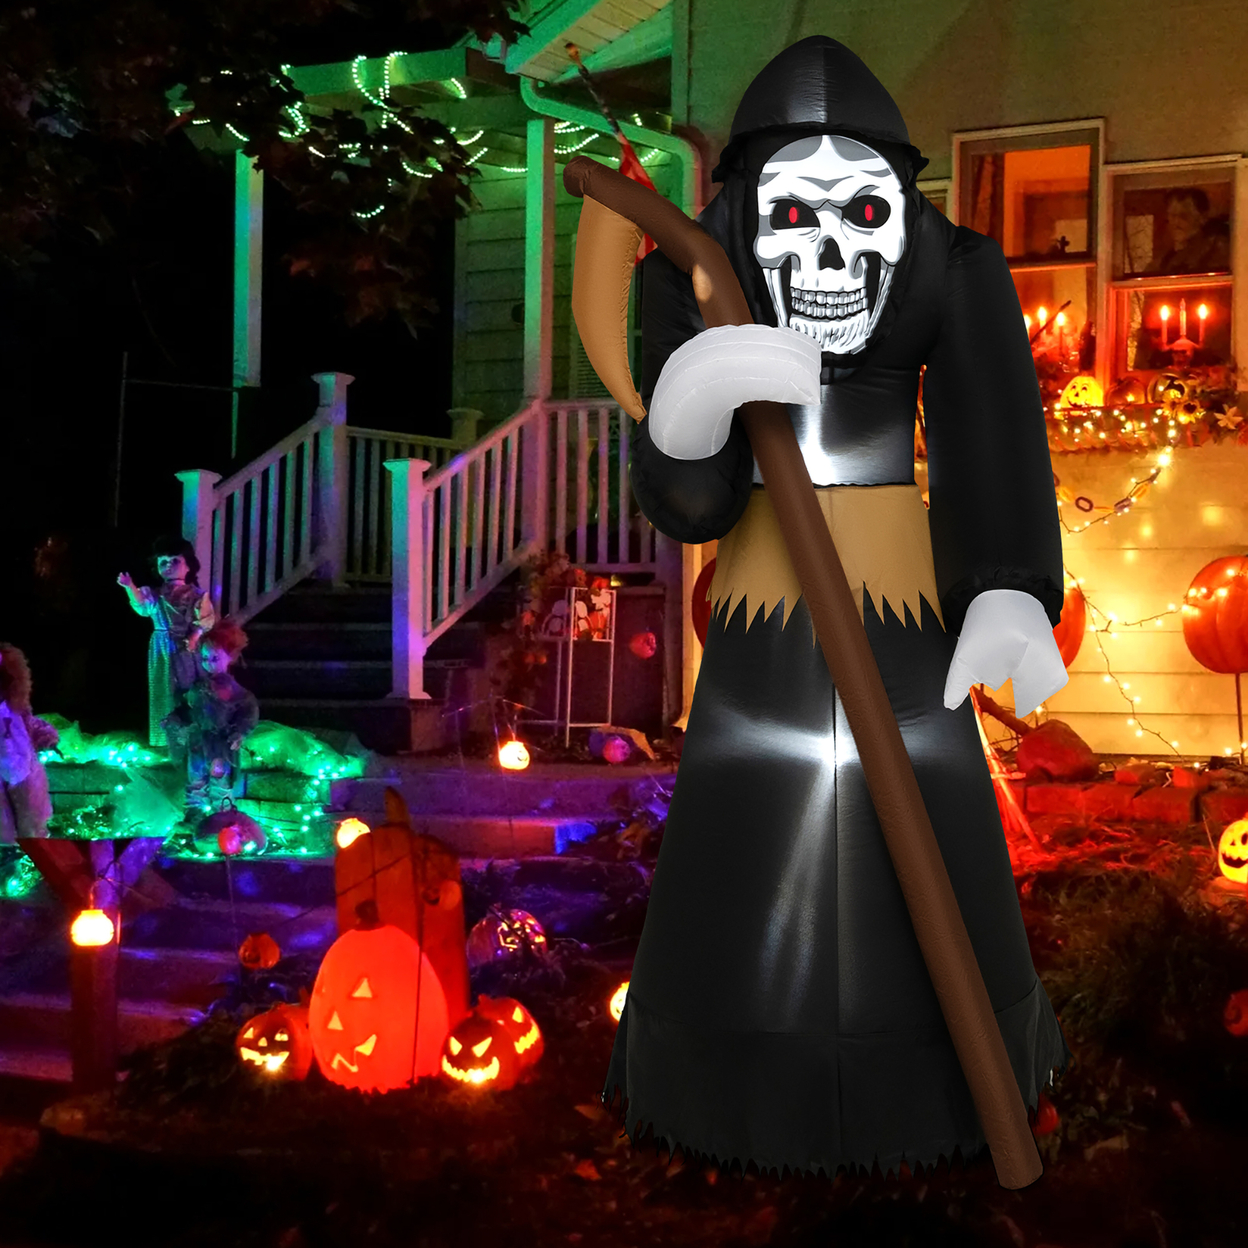 8 FT Halloween Inflatable Reaper W/ Scythe Blow Up Yard Decoration W/ Built-in Led Lights